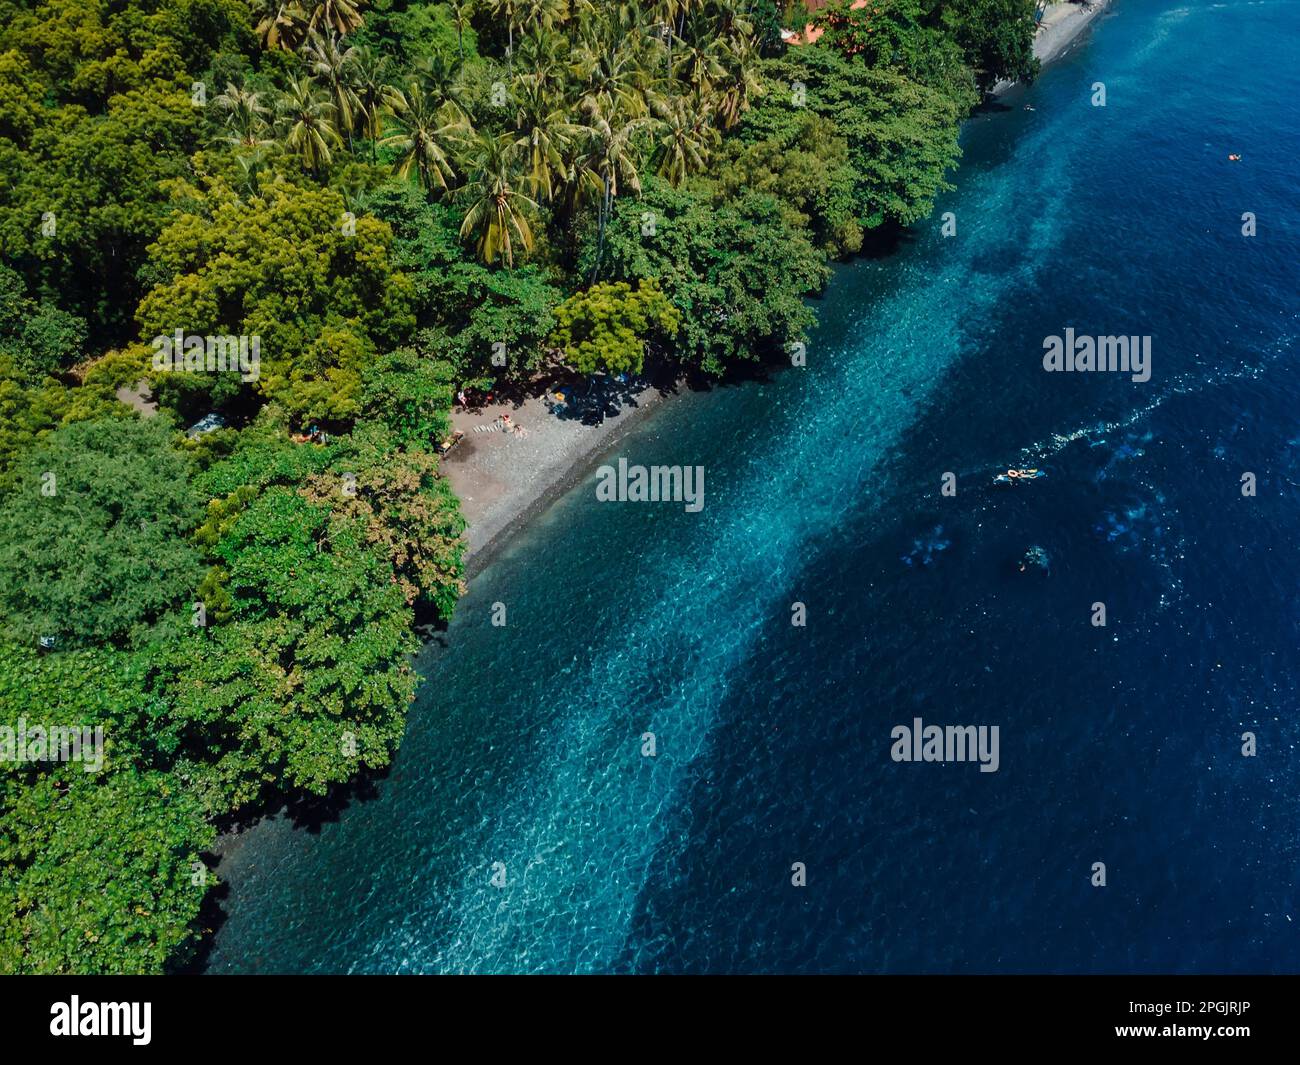 Aerial view of scenic coastline with transparent ocean and tropical beach under trees. Stock Photo